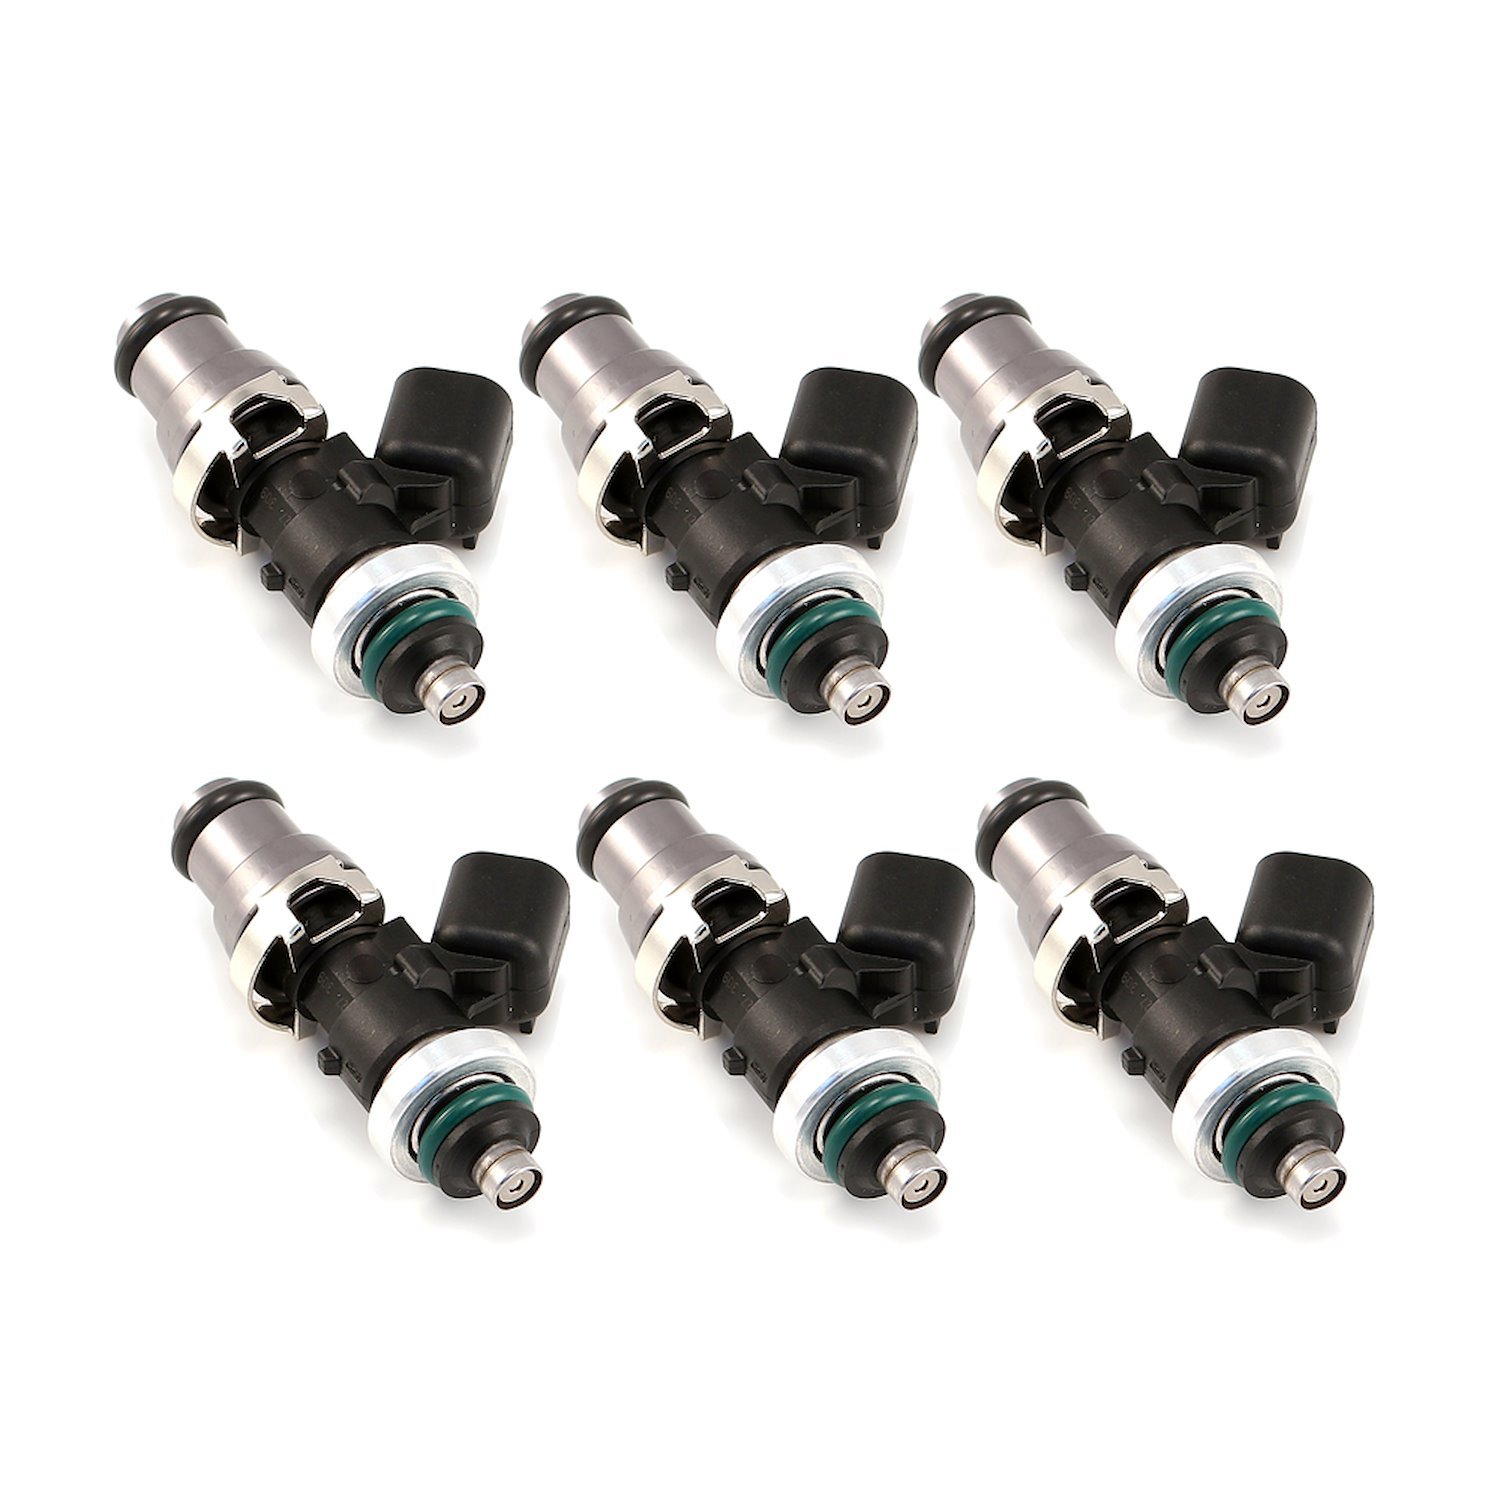 1700.48.14.R35.6 1700cc Fuel Injector Set, 48 mm Length, 14 mm Top, 14 mm Lower O-Ring (R35 Low Spacer)